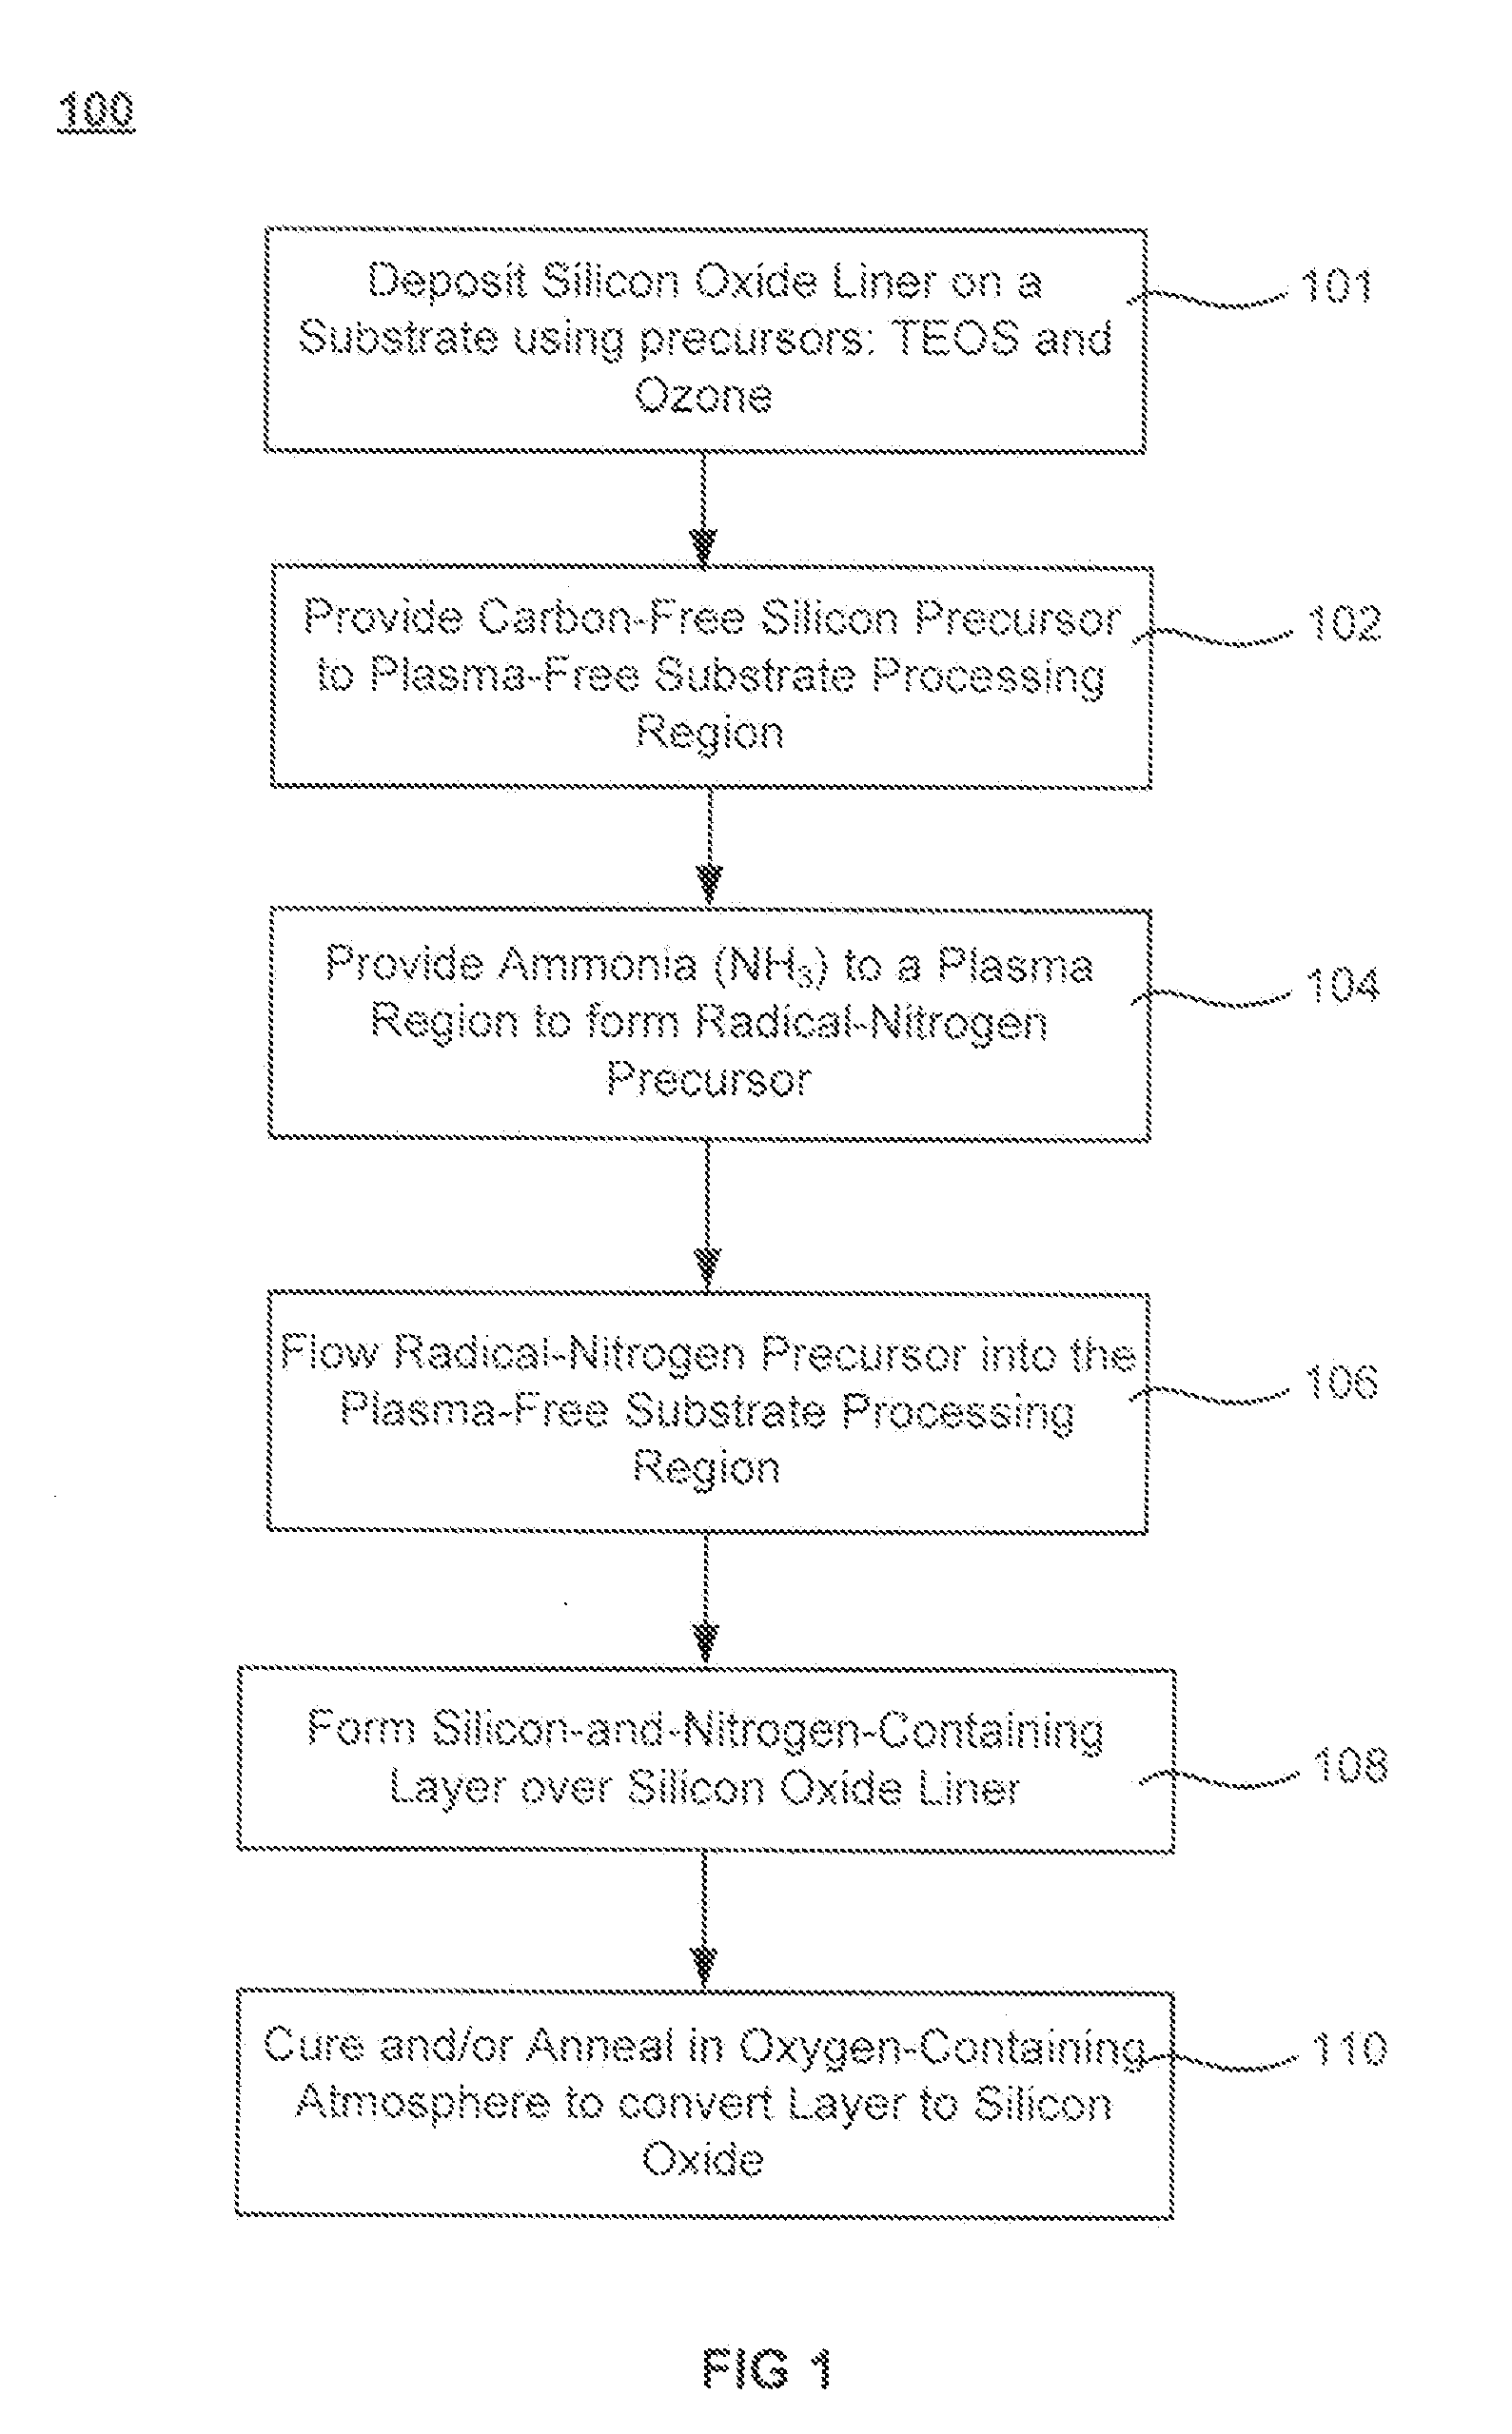 Flowable dielectric using oxide liner